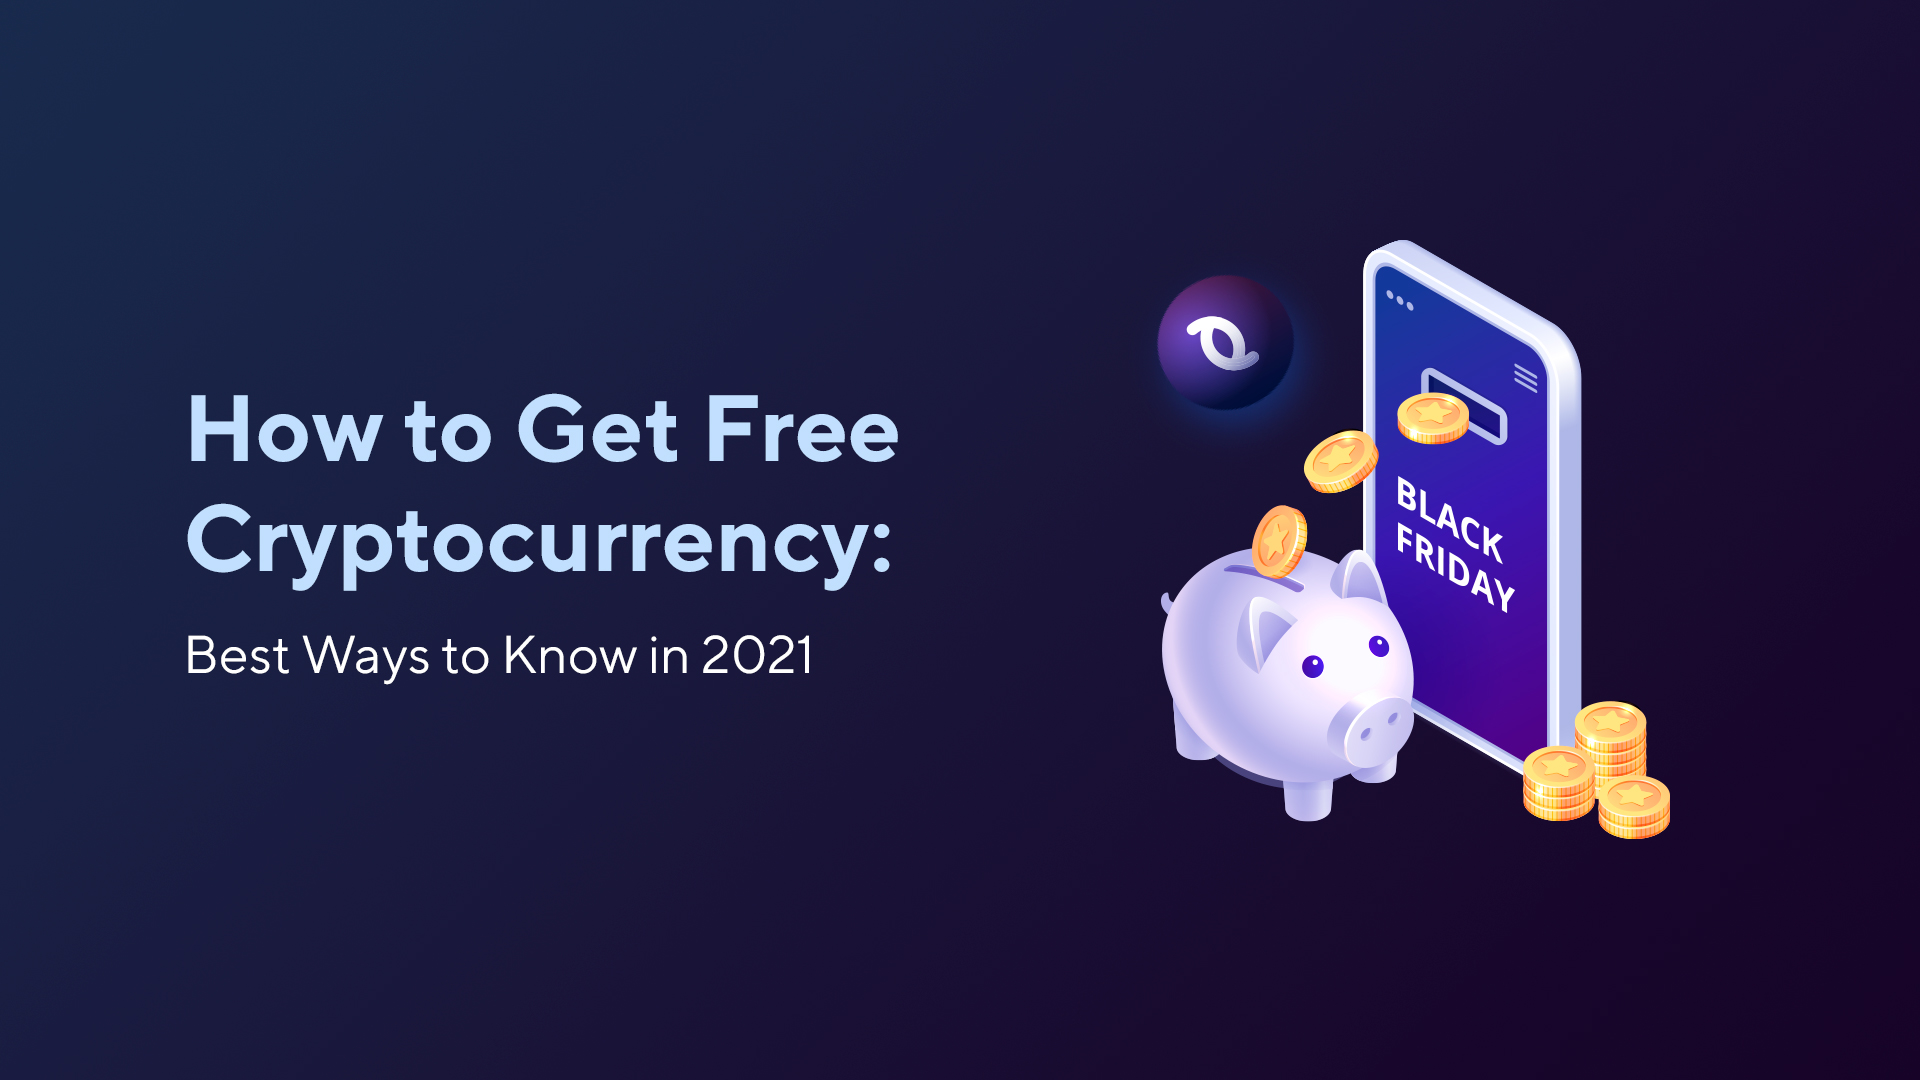 How to Get Free Cryptocurrency: Best Ways to Know in 2021